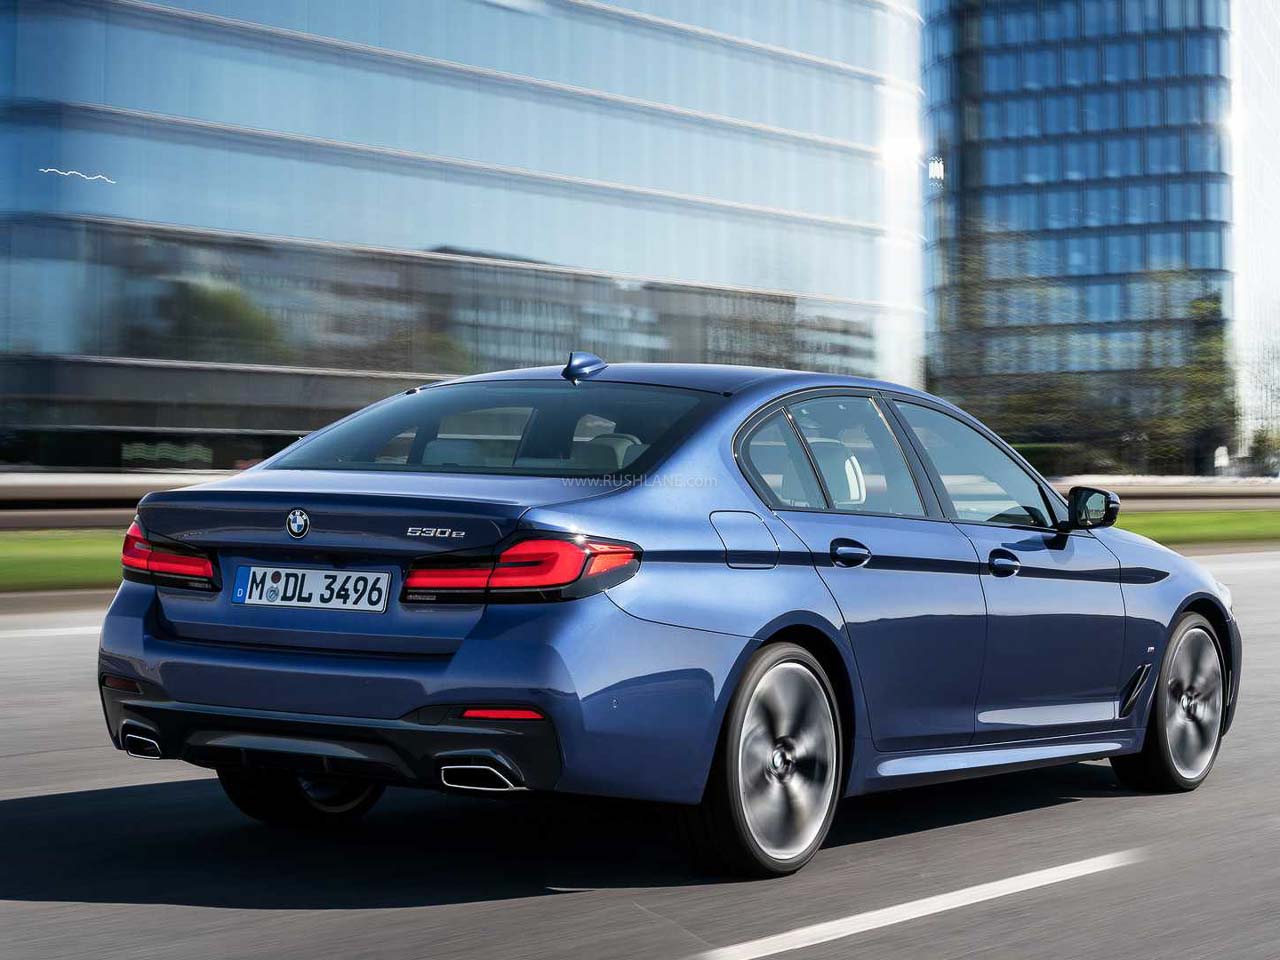 2021 BMW 5 Series to feature CarKey to unlock/start via iPhone